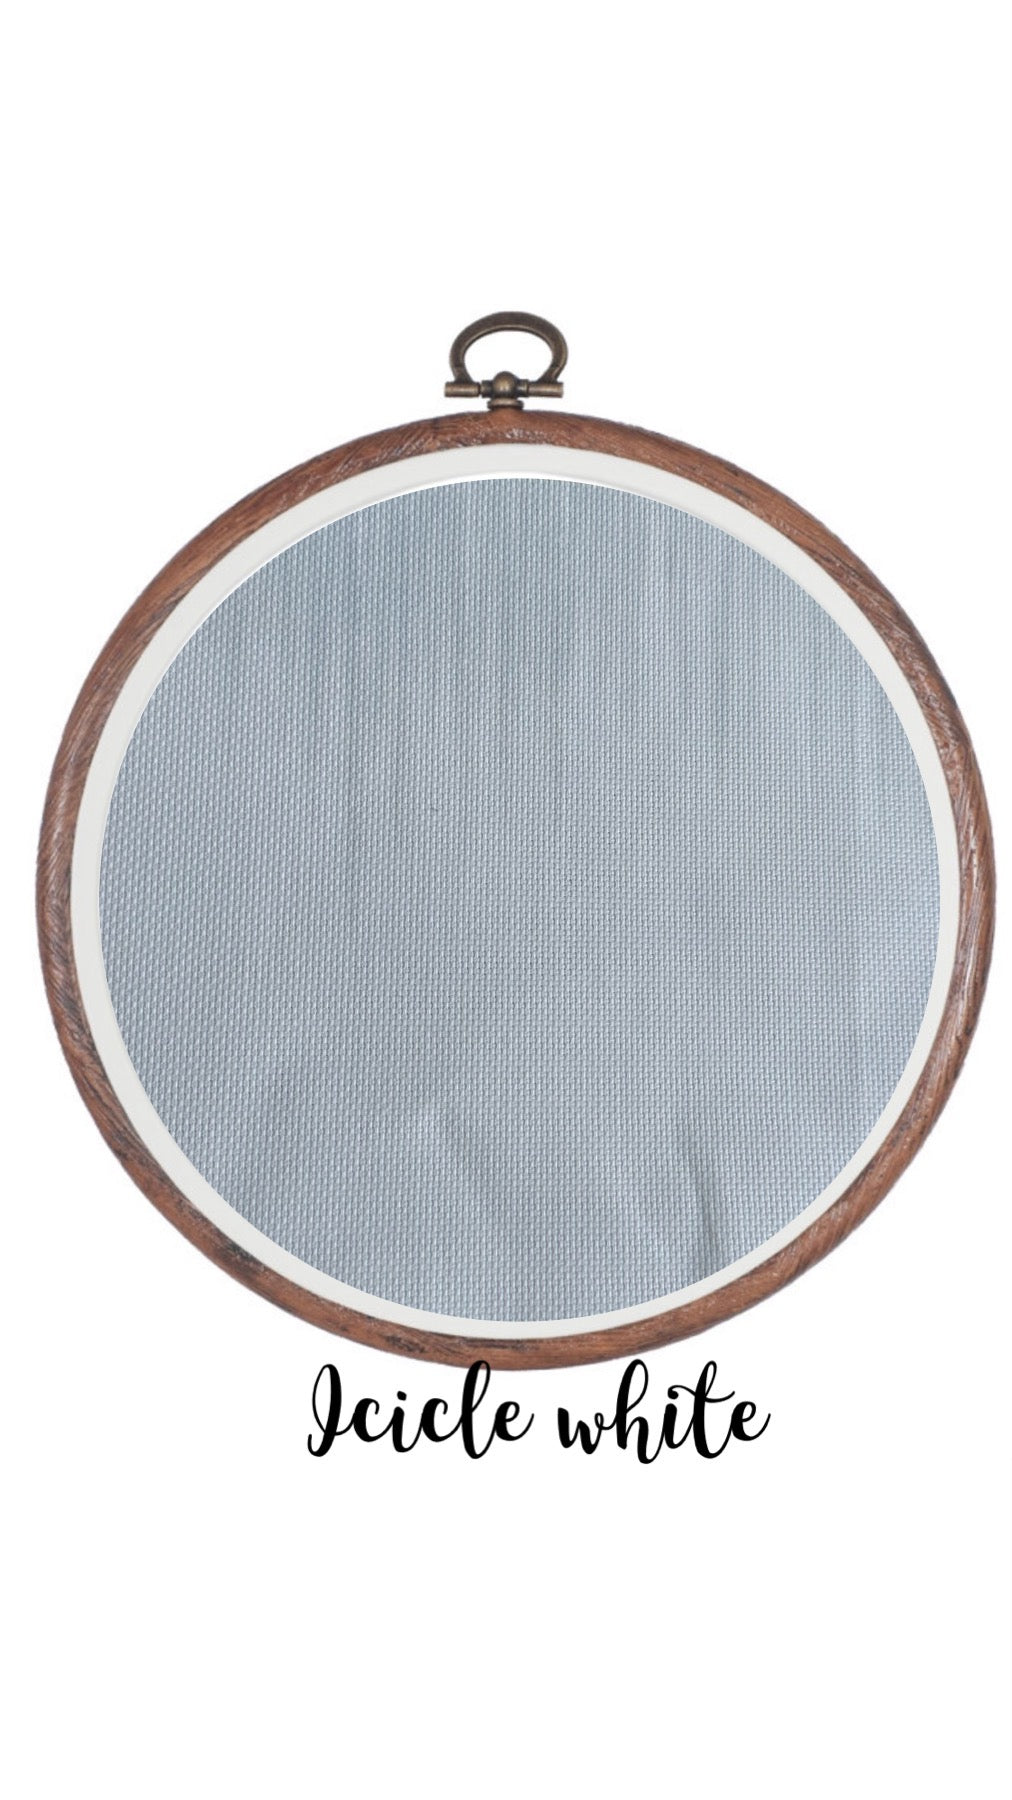 Icicle White Aida Cloth || Hand Dyed Effect Aida Canvas || Cross Stitching